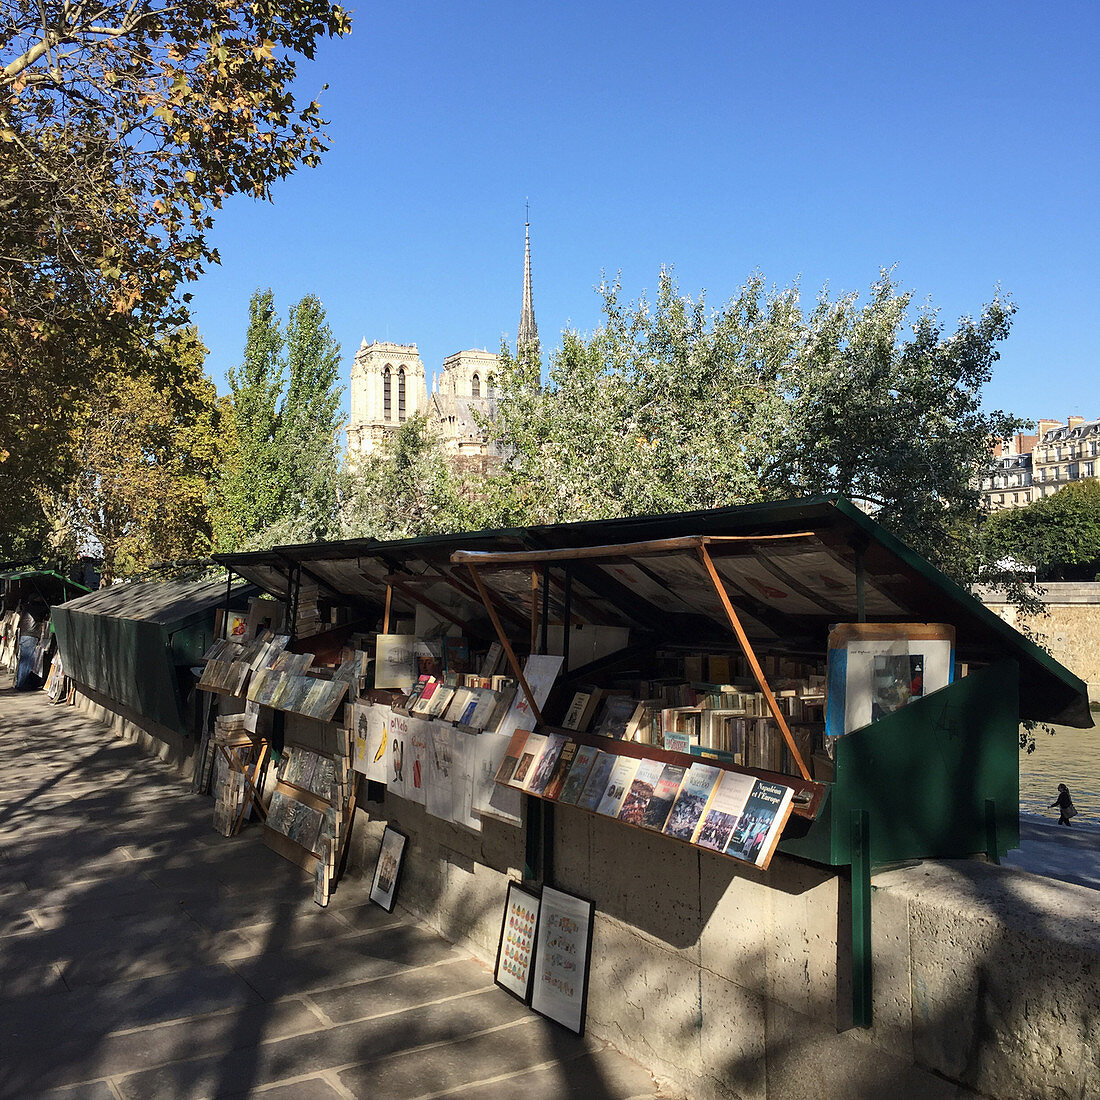 A book stall on the bank of the Seine with the Notre Dame cathedral in the background, Paris, France